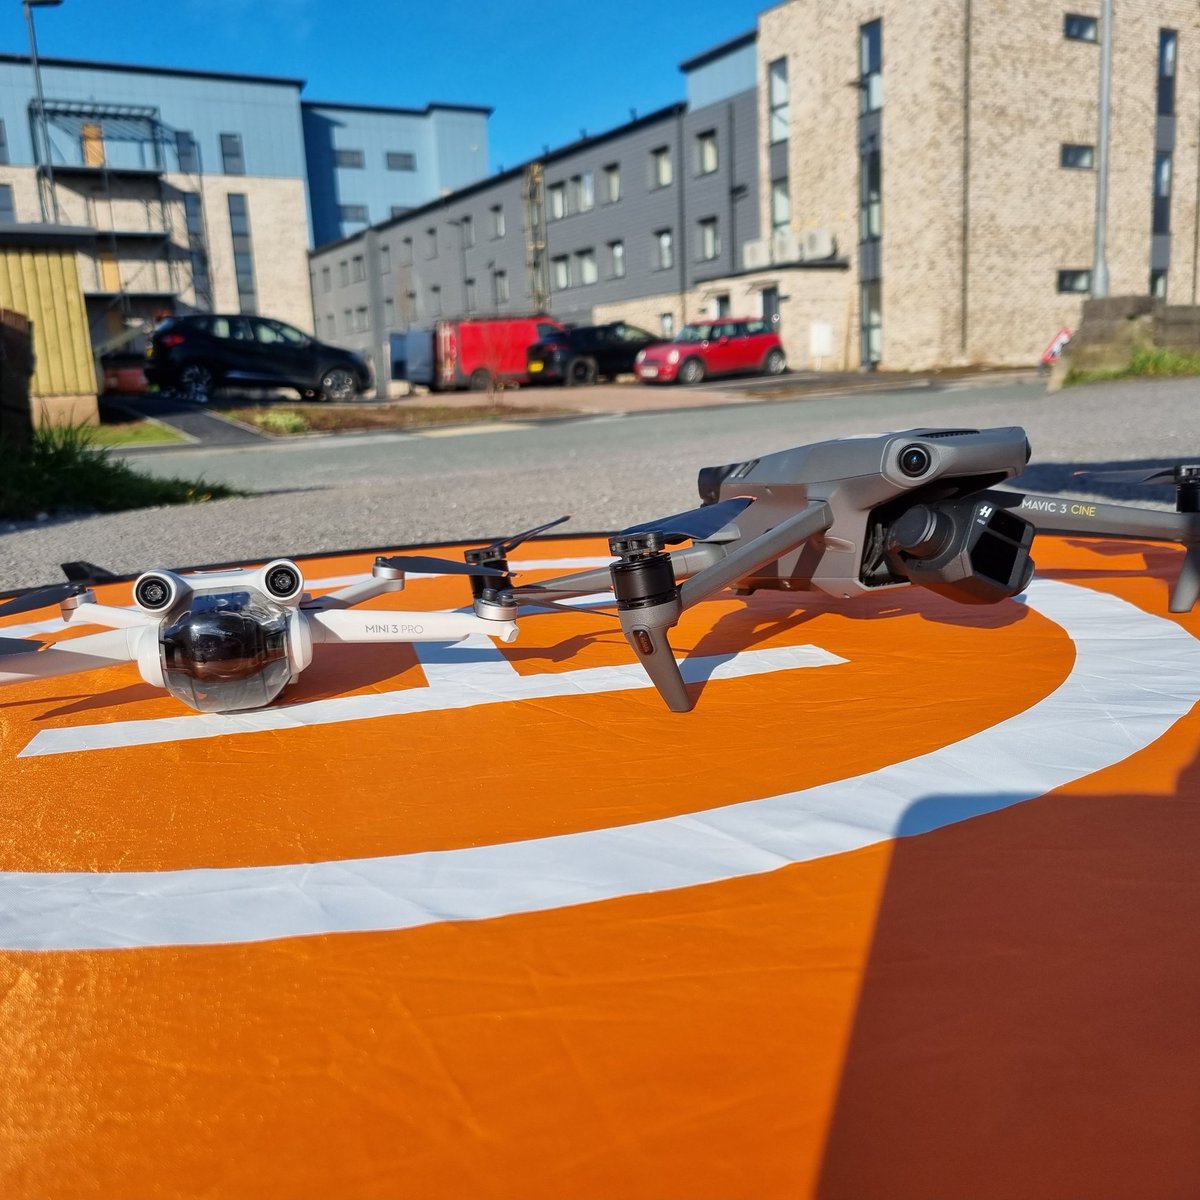 4 reasons how drones will help with your surveying projects... 🌟 Multiple deliverables in just one drone flight 🌟 Turn raw images into multiple 2D and 3D drawings 🌟 Ease of sharing deliverables with clients via online portals 🌟 Accelerate project timeline #drones #survey